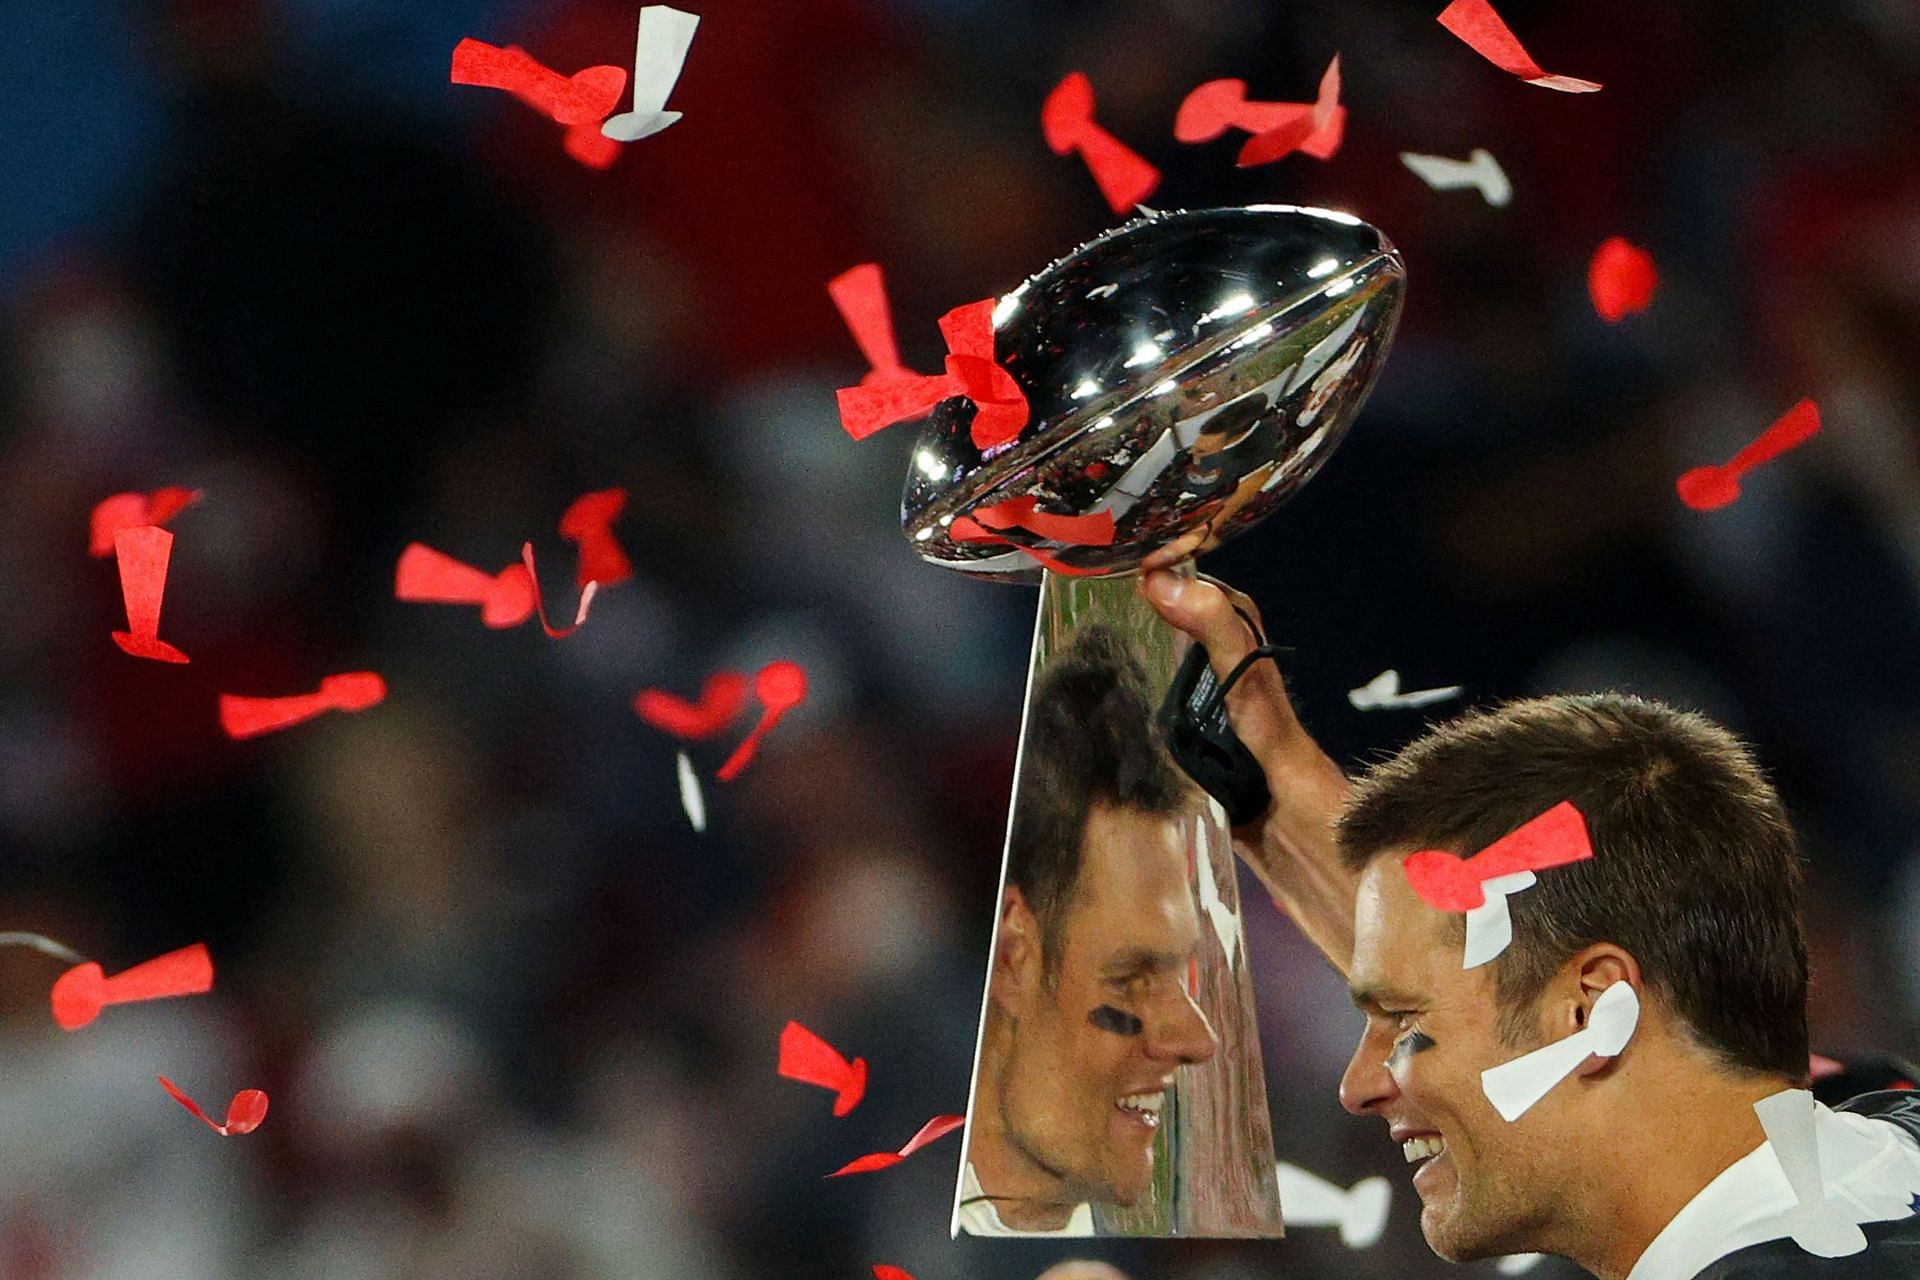 Tom Brady won Super Bowl LV with the Buccaneers